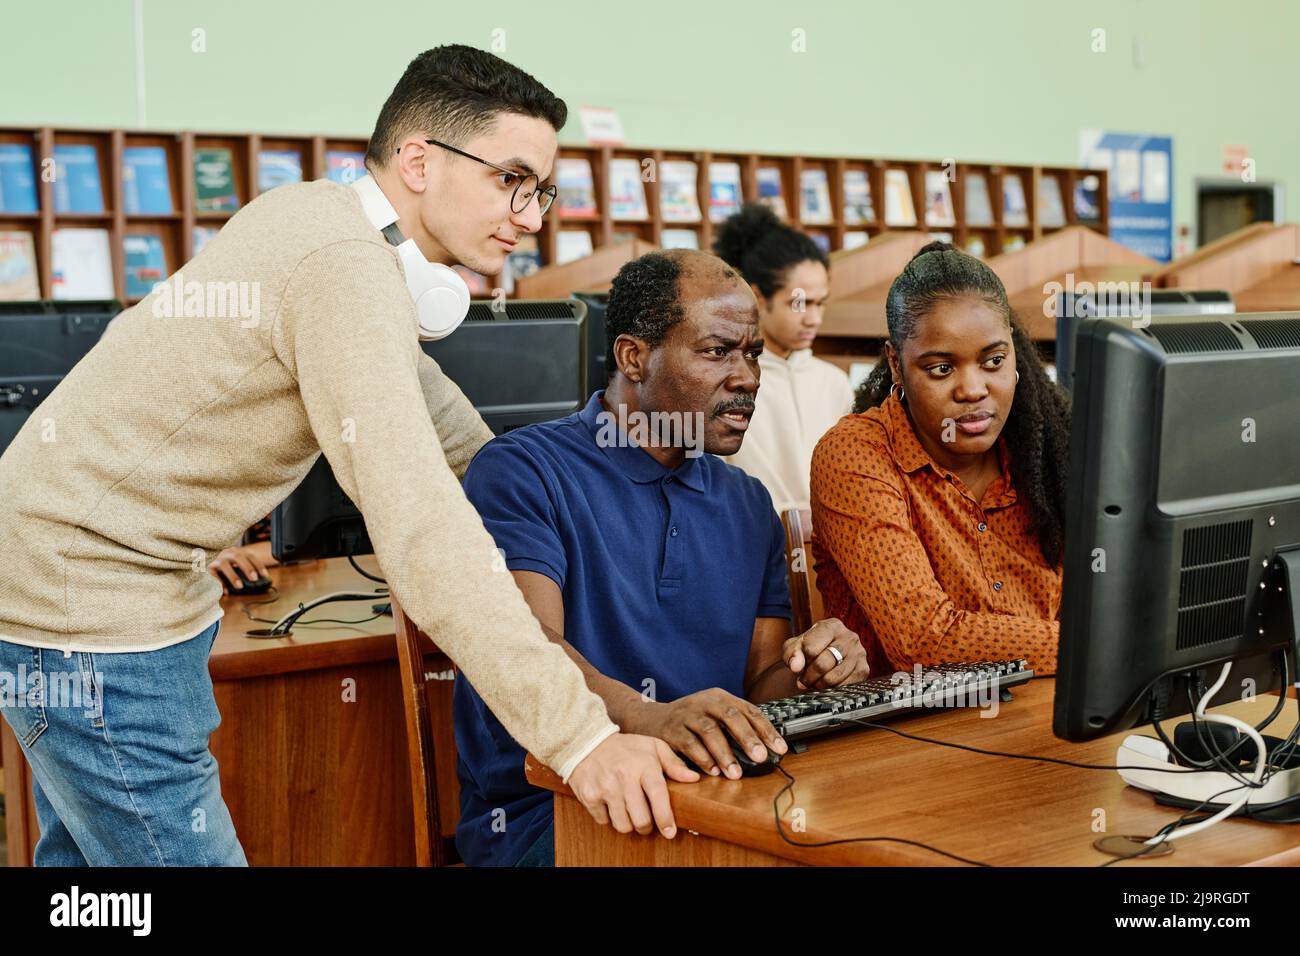 Group of three migrant students searching data in internet on desktop computer in university library Stock Photo